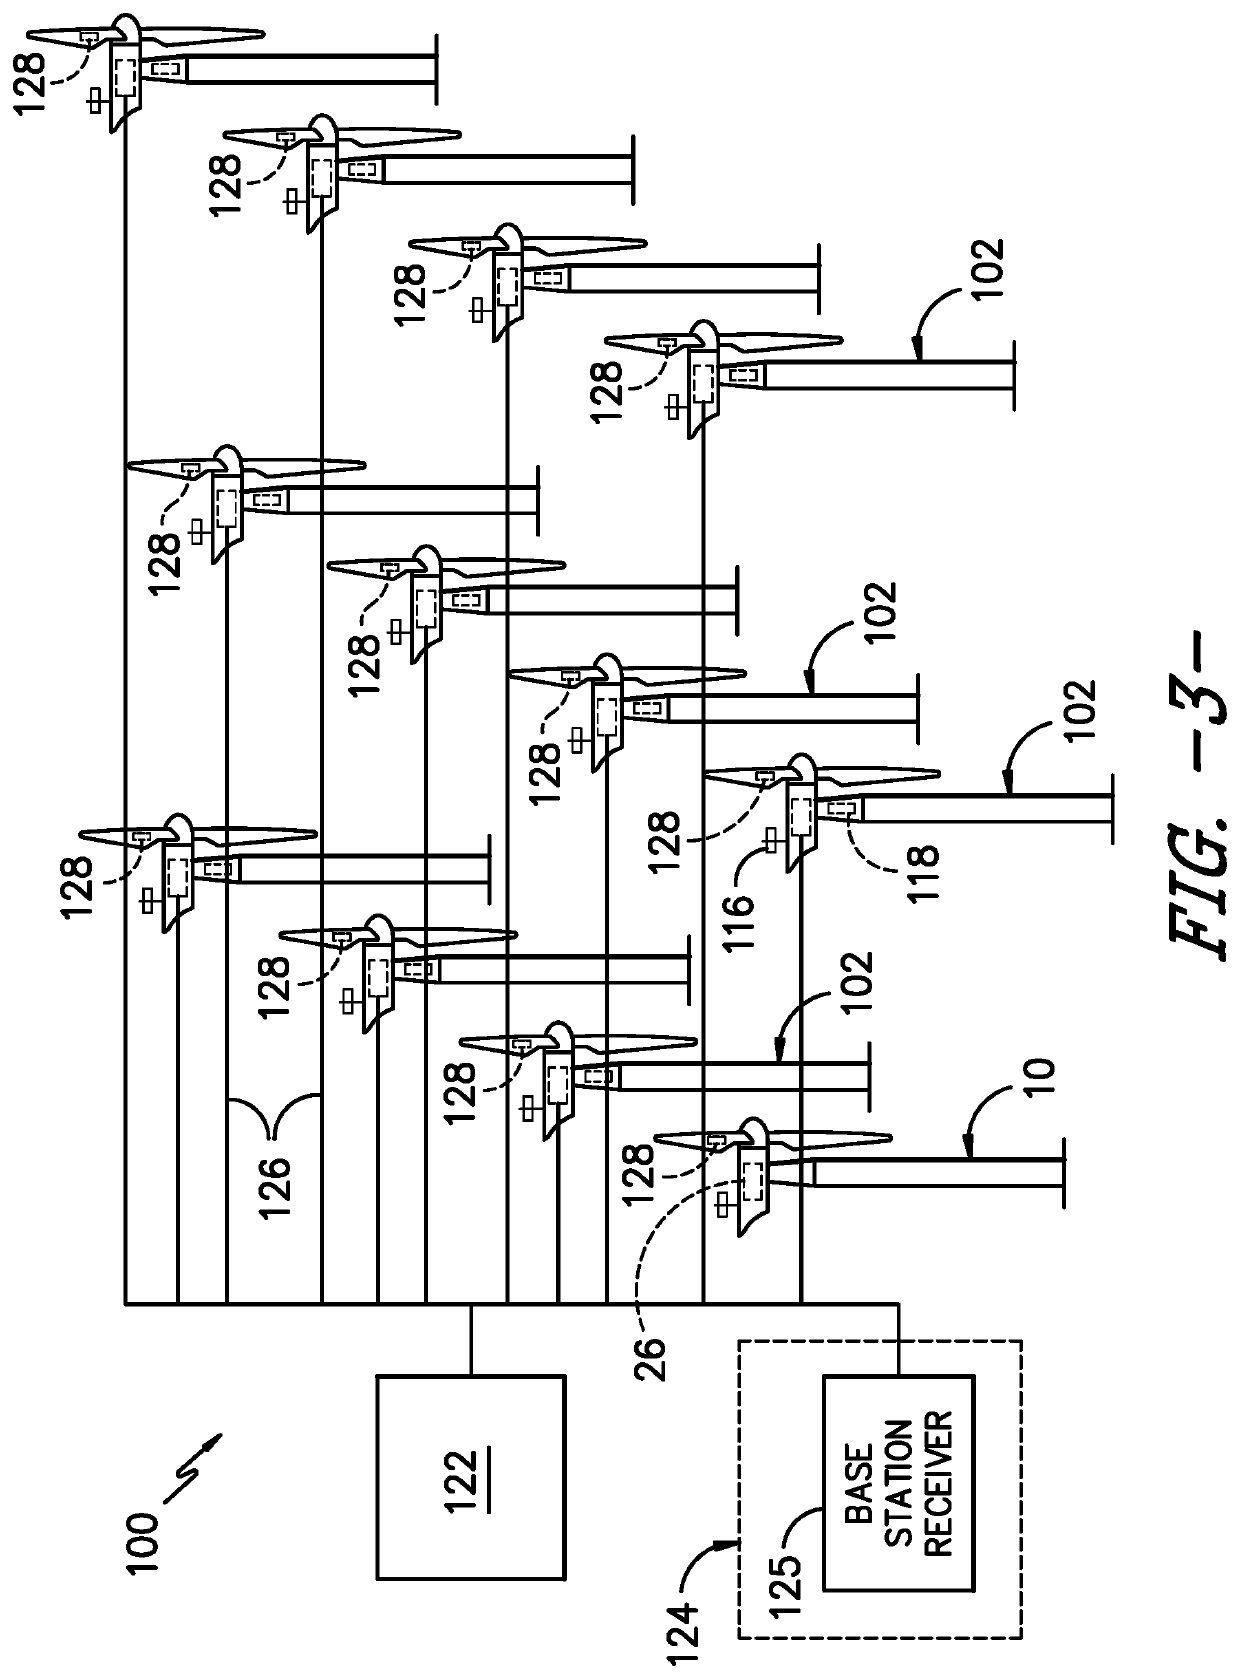 Pitch control of a wind turbine based position data from position localization sensors